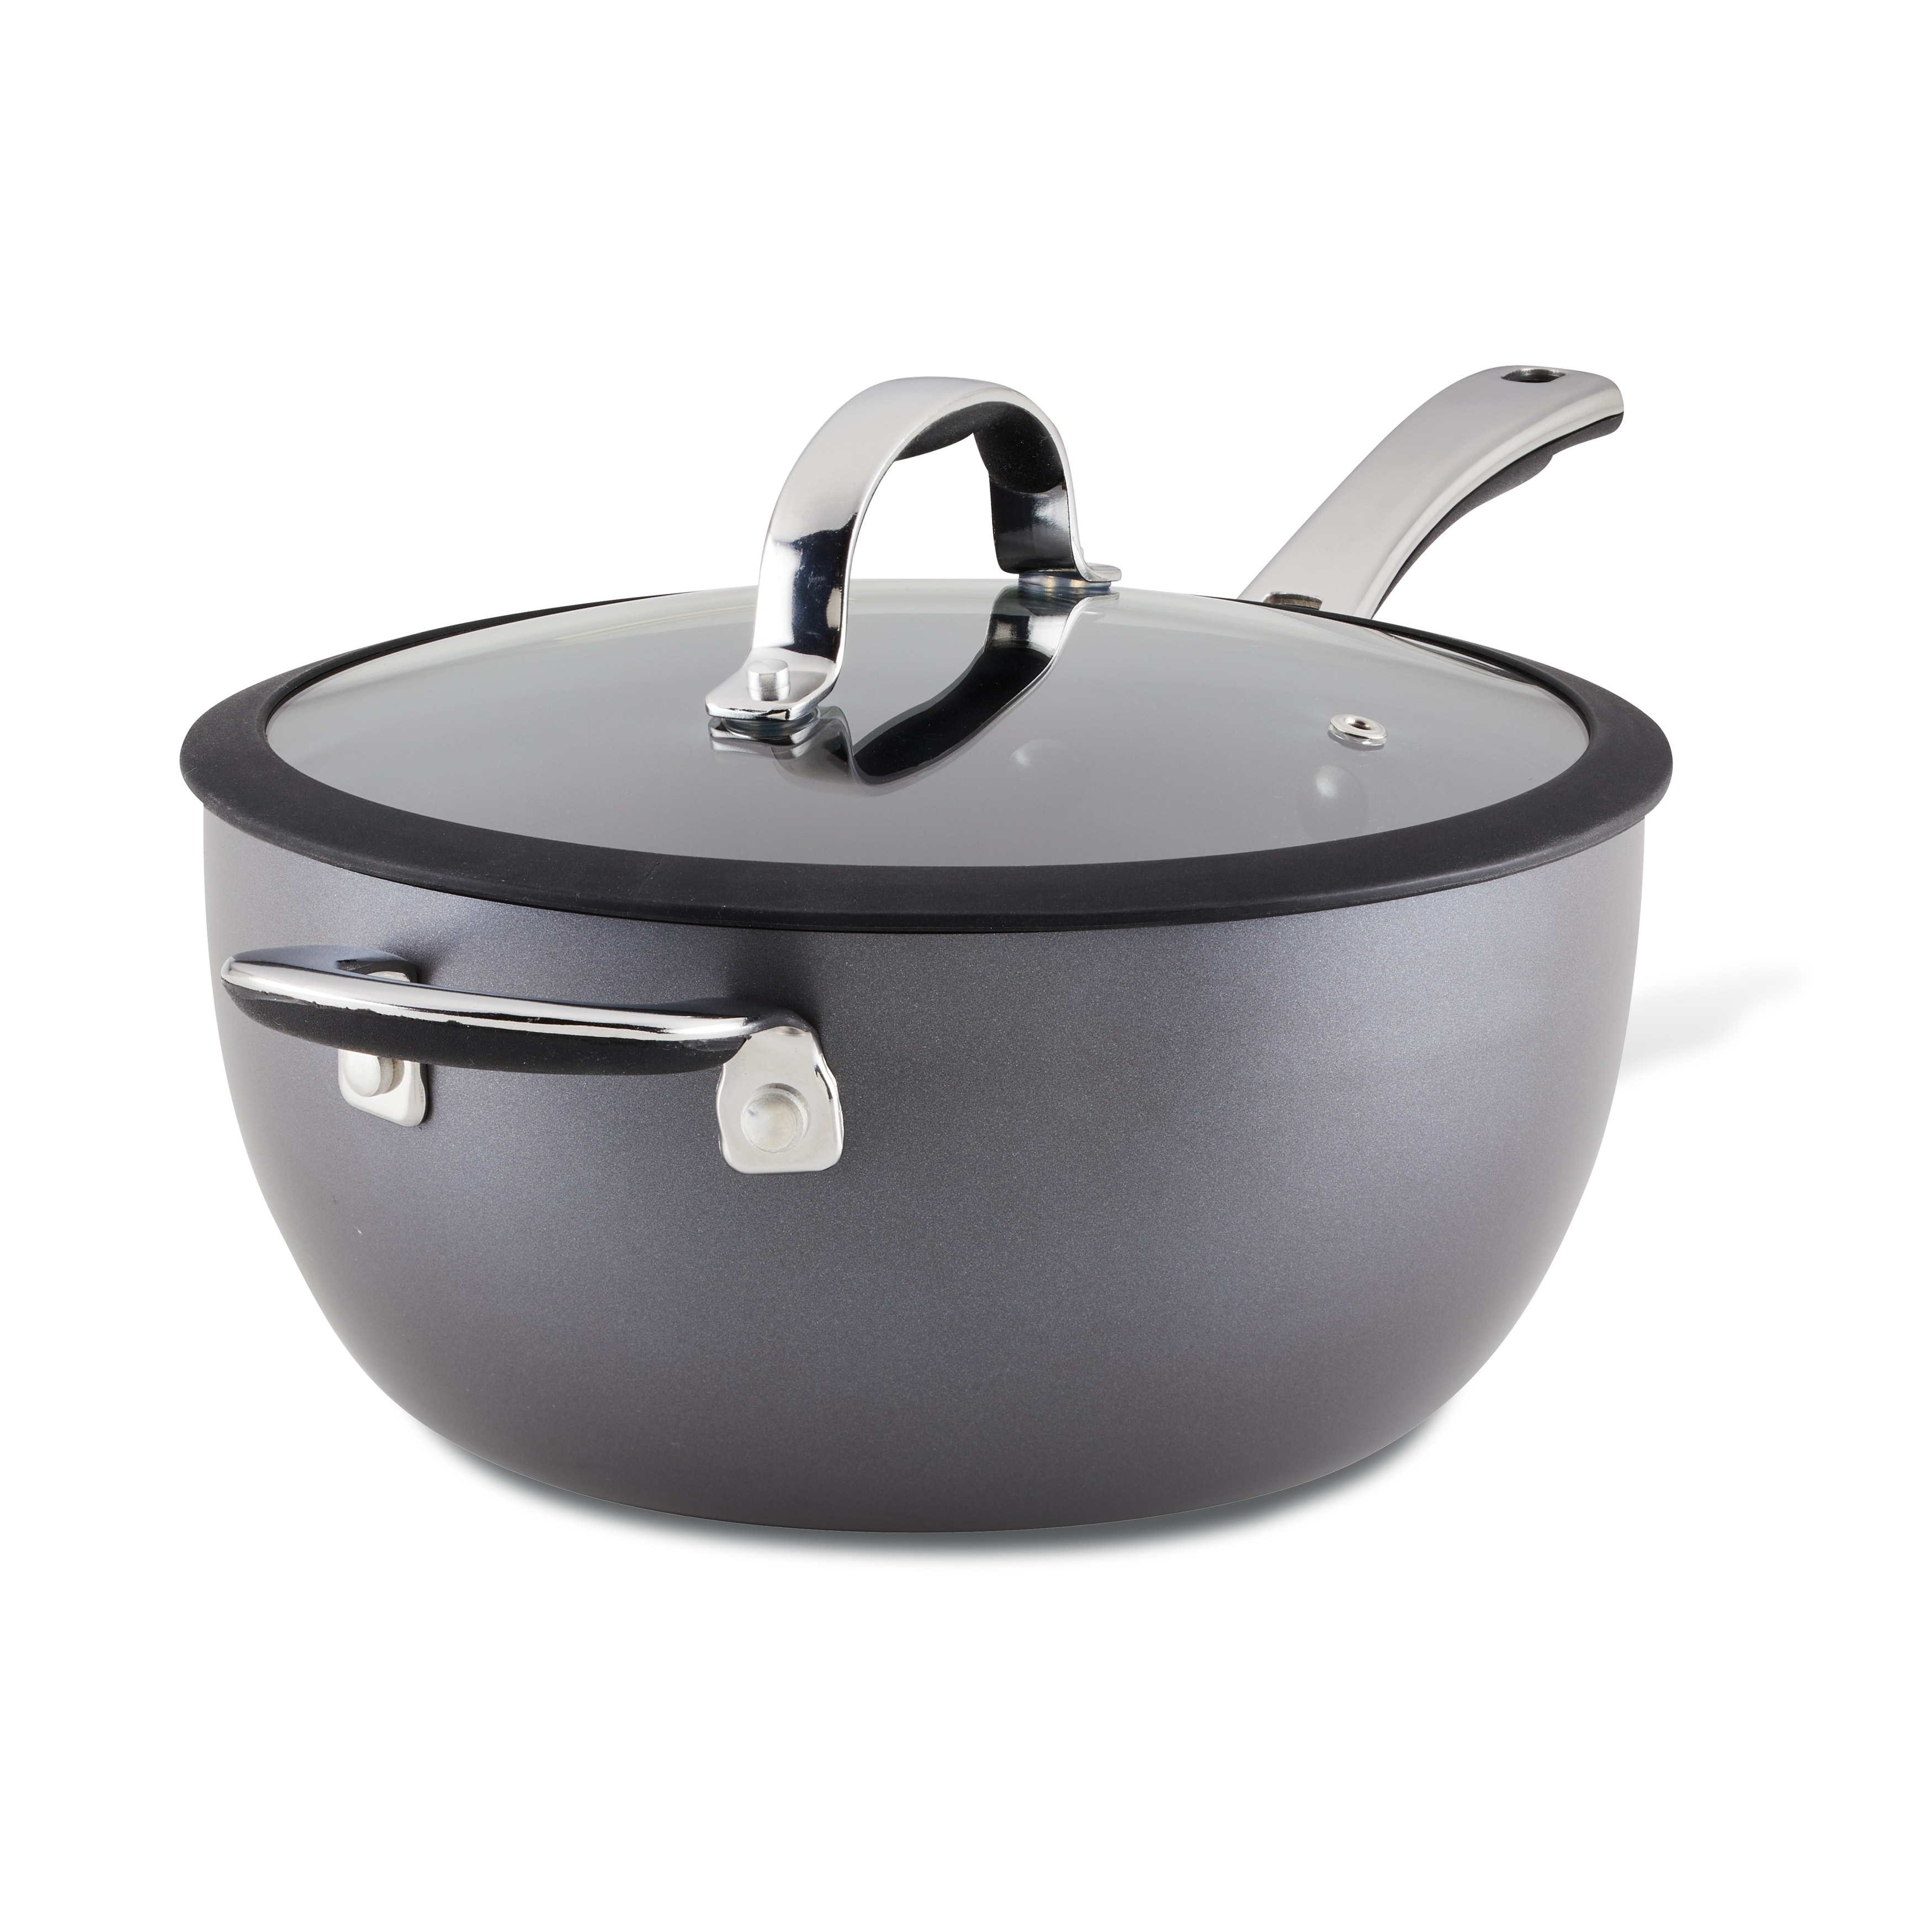  Rachael Ray Brights Hard-Anodized Nonstick Cookware